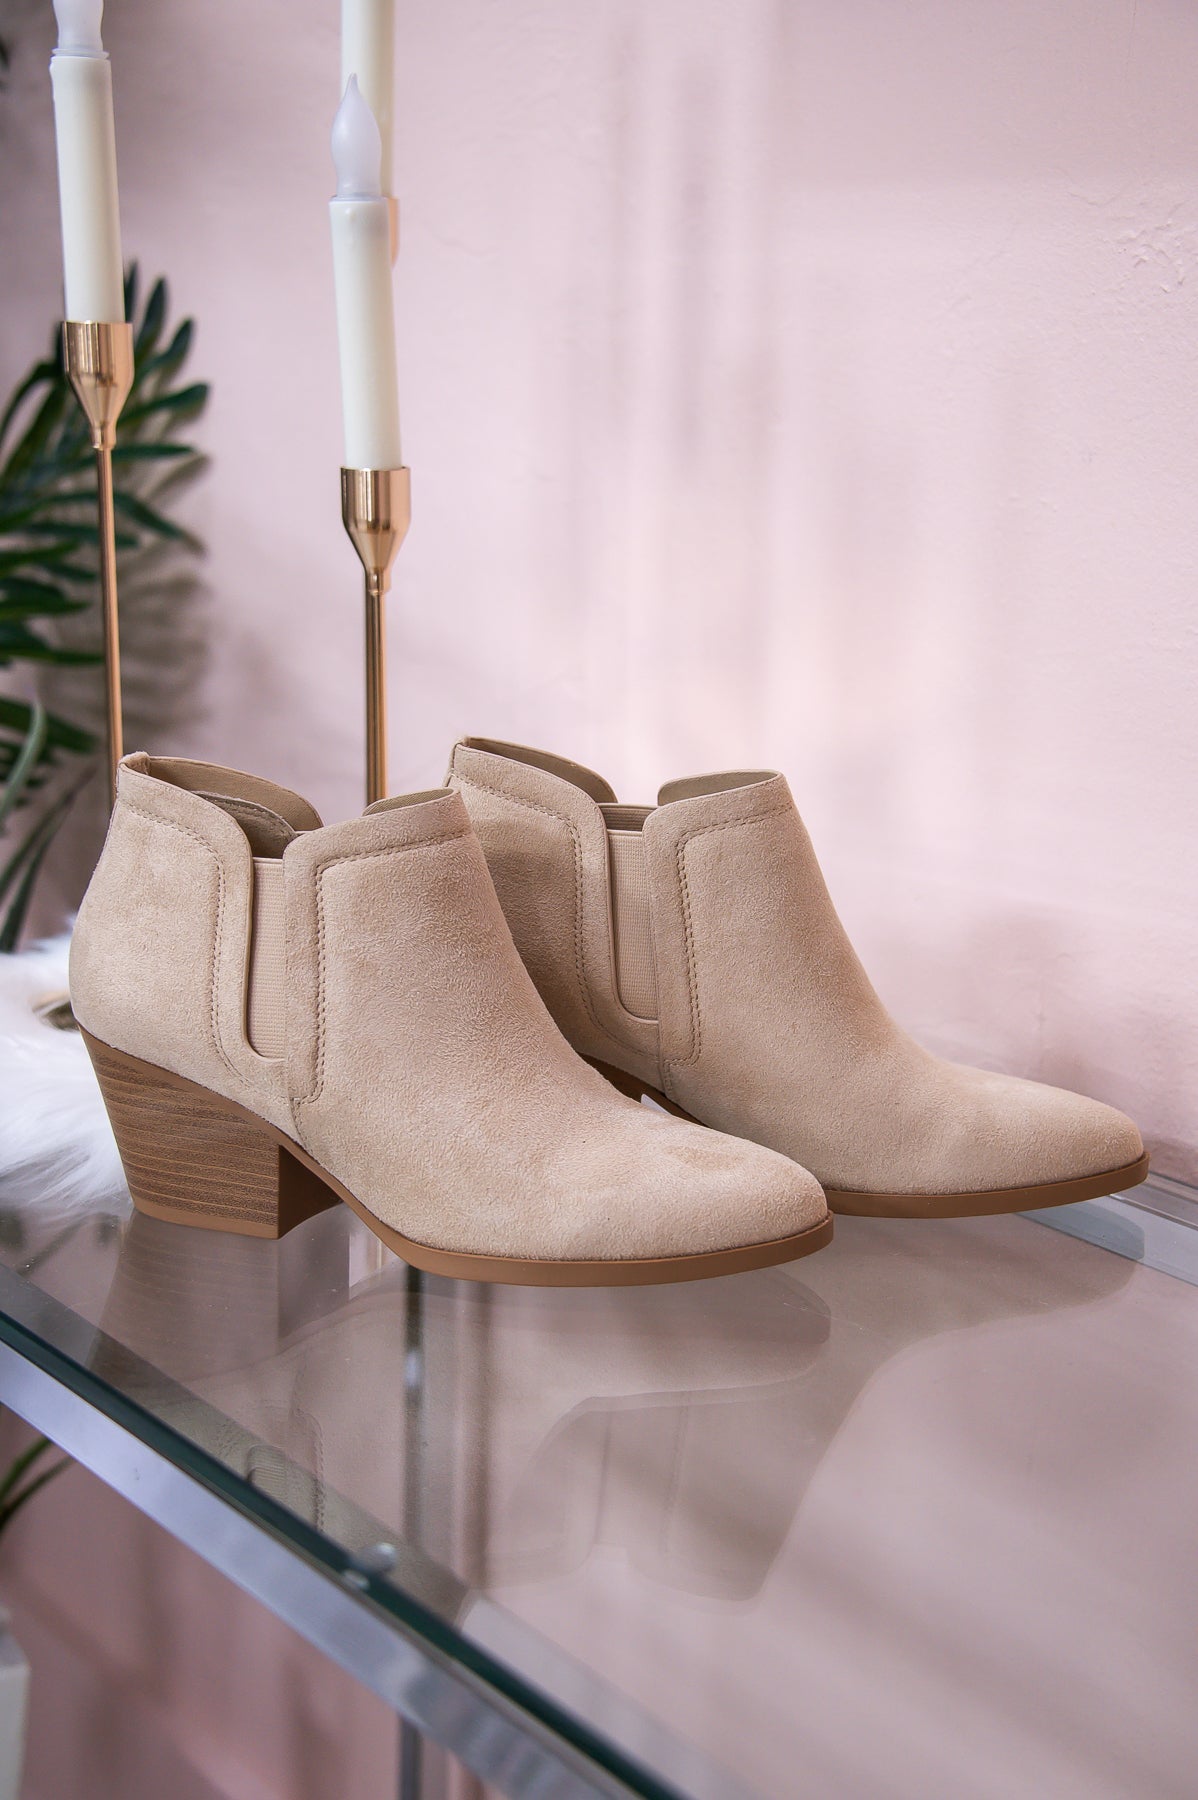 Let's Get Lost Together Sand Slip On Booties - SHO2618SD